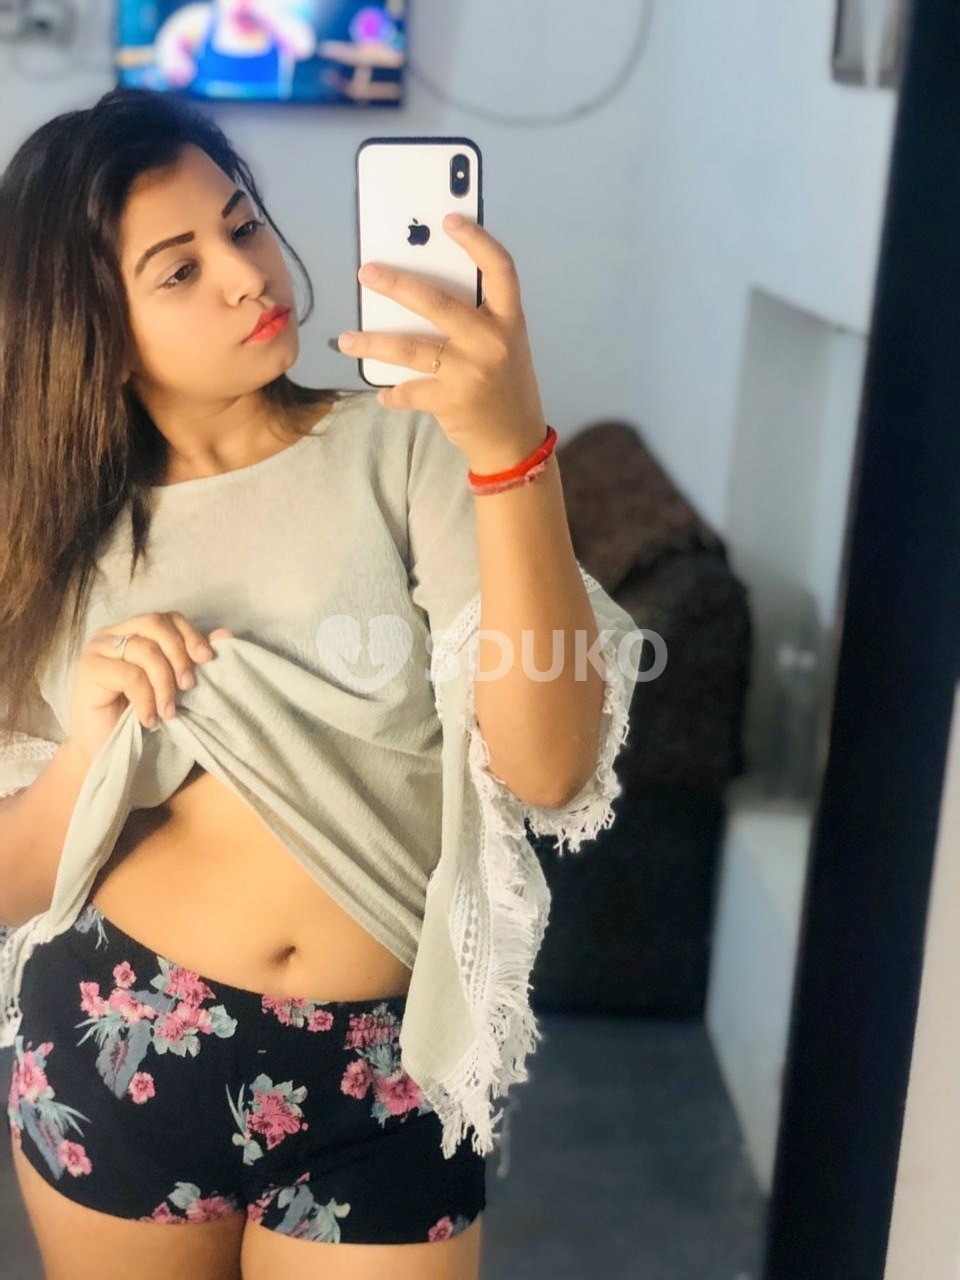 DEHRADUN LOW RATE (VIDHI CALL GIRLS) ESCORT FULL HARD FUCK WITH NAUGHTY IF YOU WANT TO FUCK MY PINK PUSSY WITH BIG BOOBS